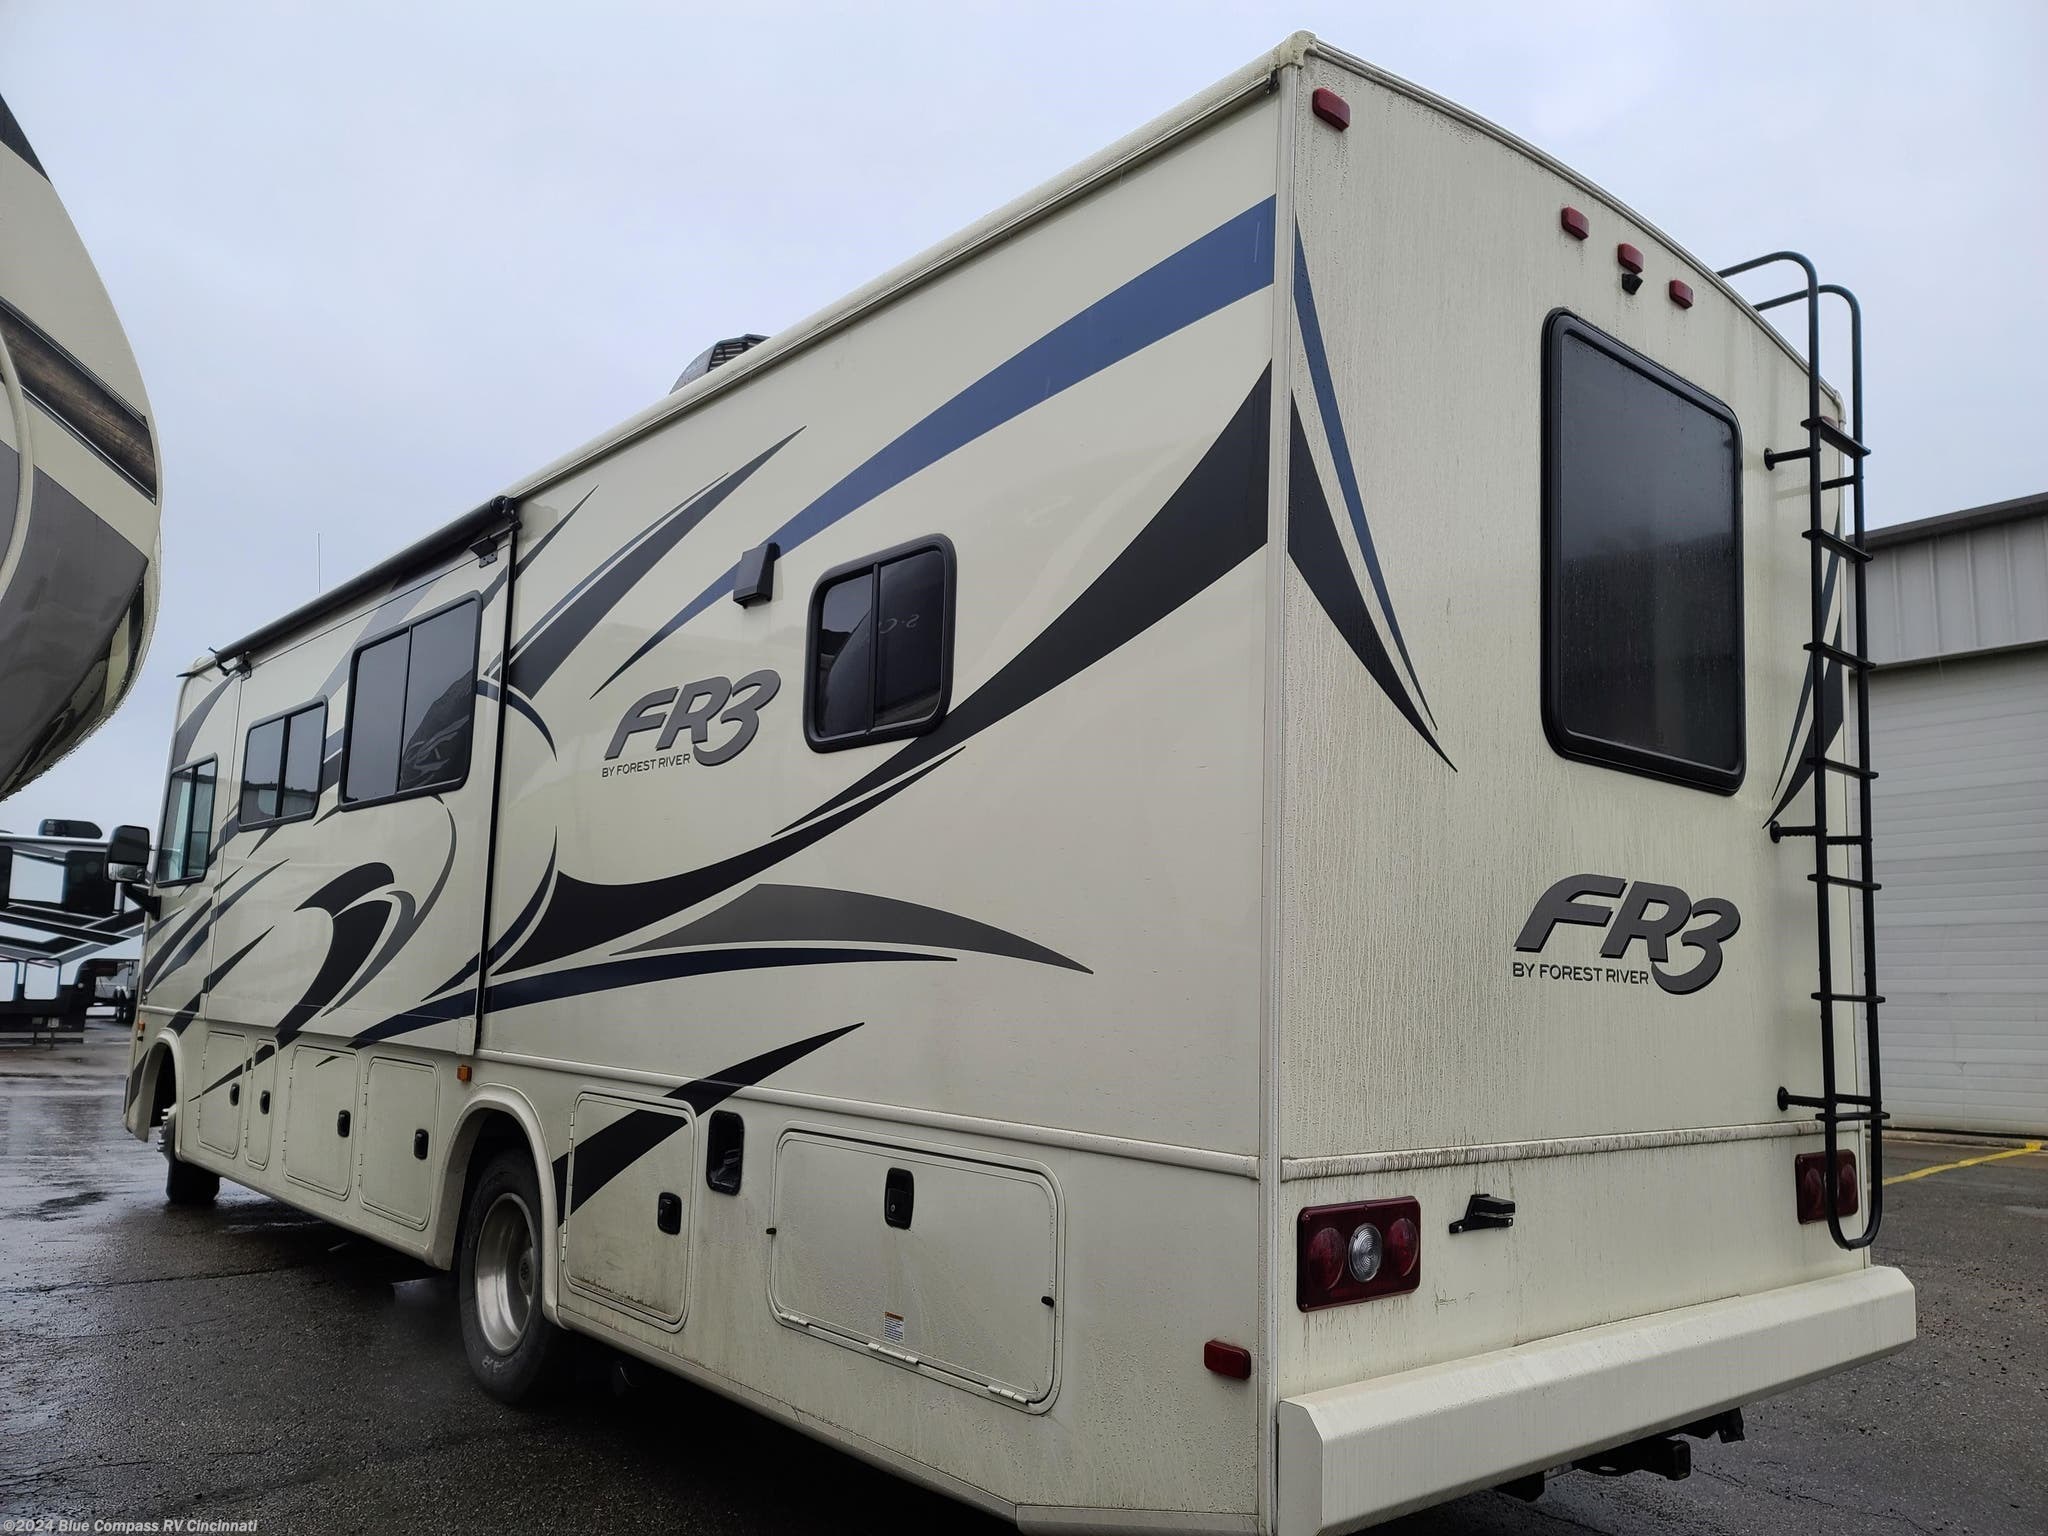 2020 Forest River FR3 30DS RV for Sale in Cincinnati, OH 45251 | FG128304-A | RVUSA.com Classifieds 2020 Forest River Fr3 30ds For Sale